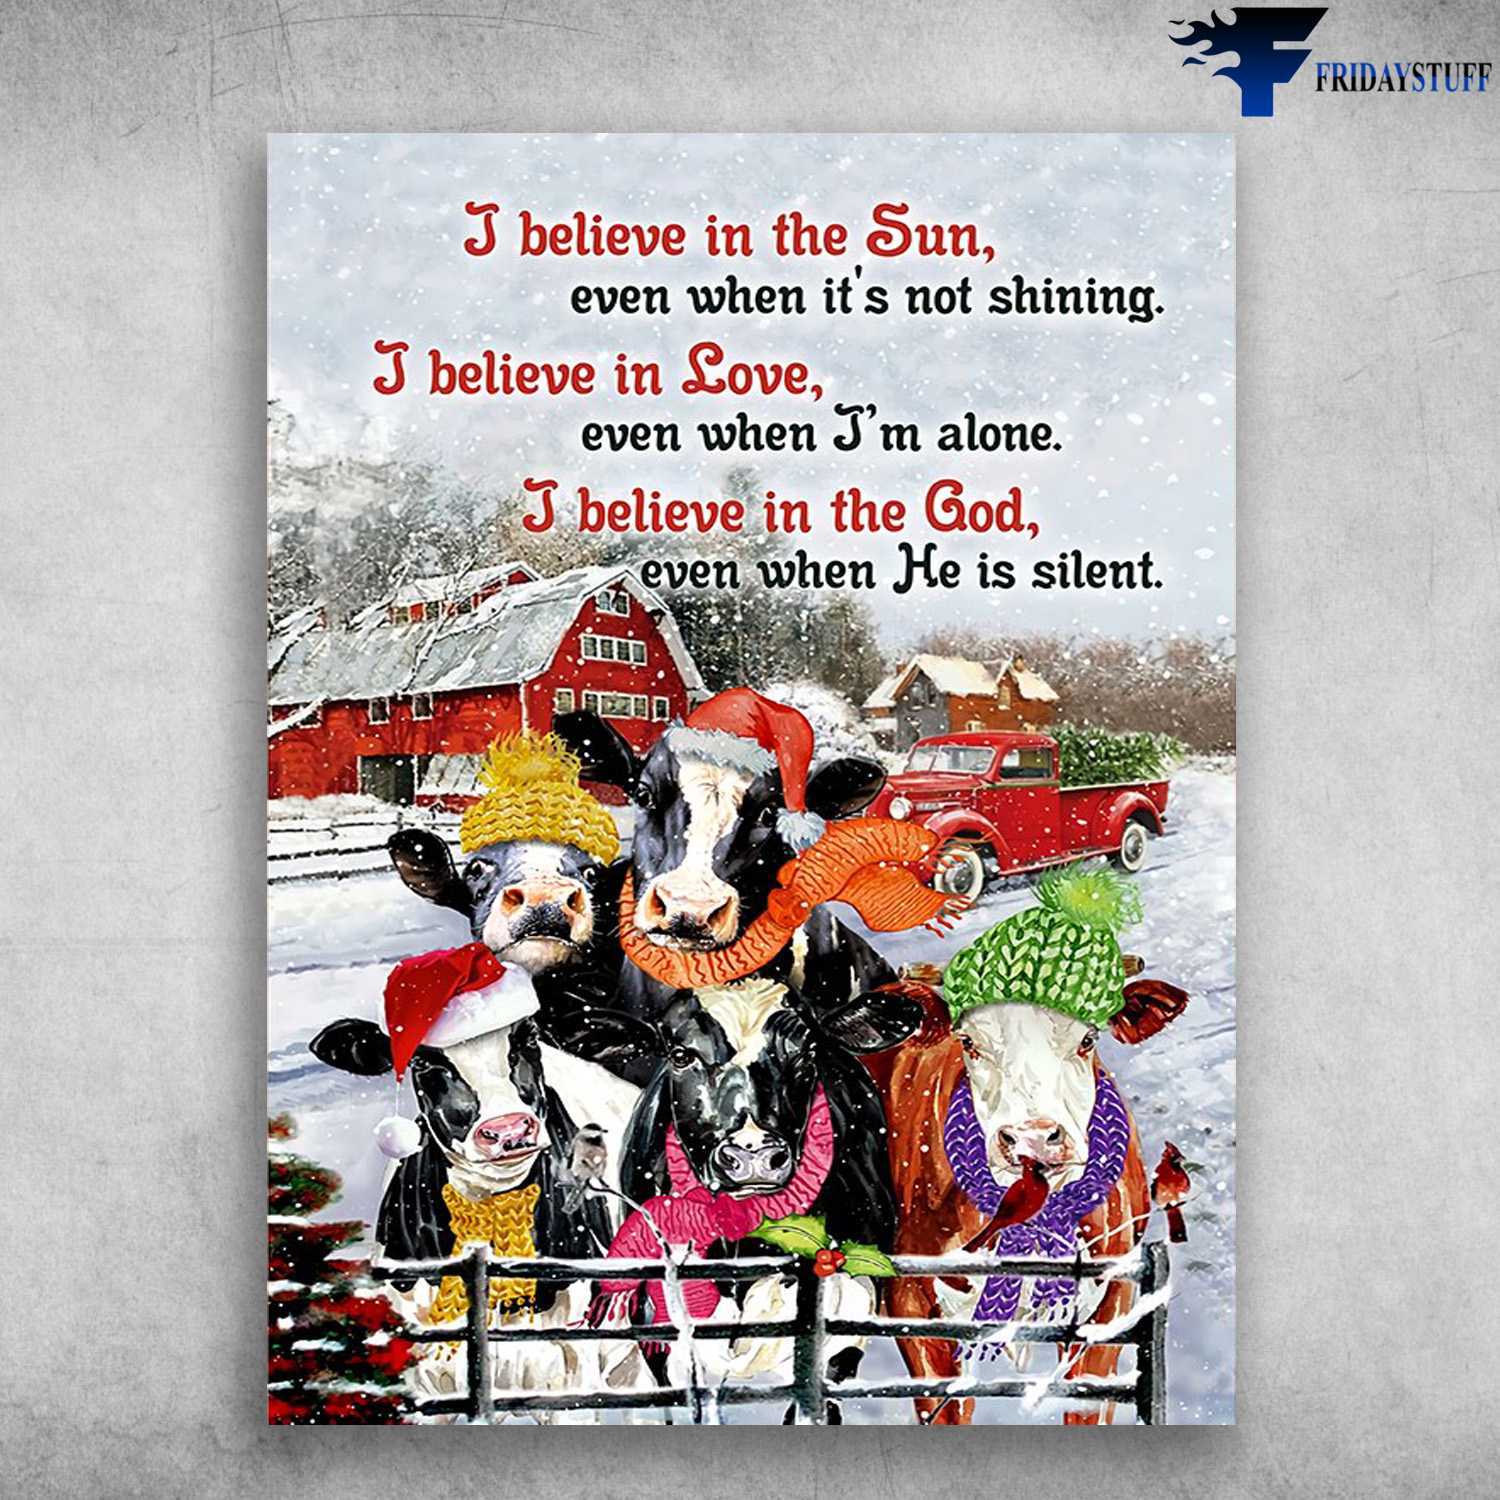 Dairy Cow, Farmer Winter, Christmas Poster - I Believe In The Sun, Even When It's Not Shining, I Believe In Love, I Believe In God, Even When He Is Silent